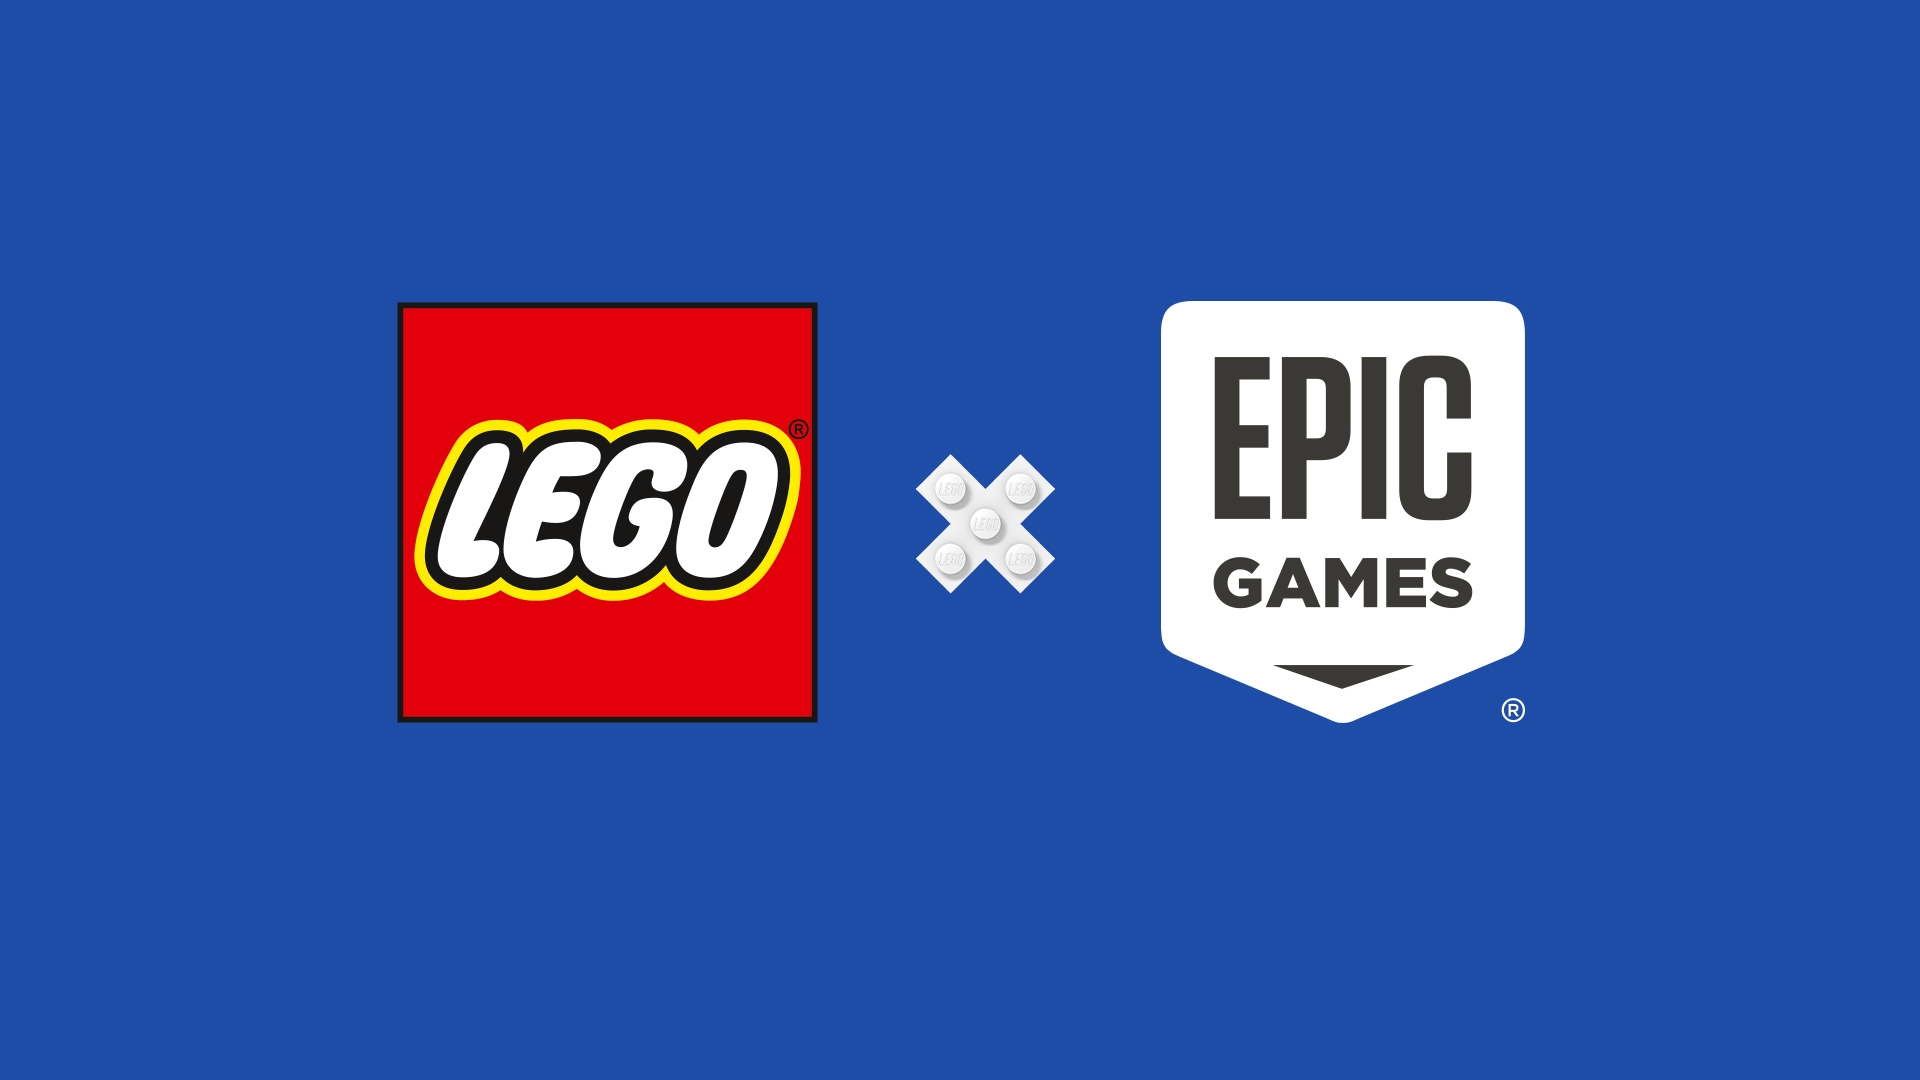 LEGO Group and Epic Games team up to build a place for kids to play in the - About Us - LEGO.com